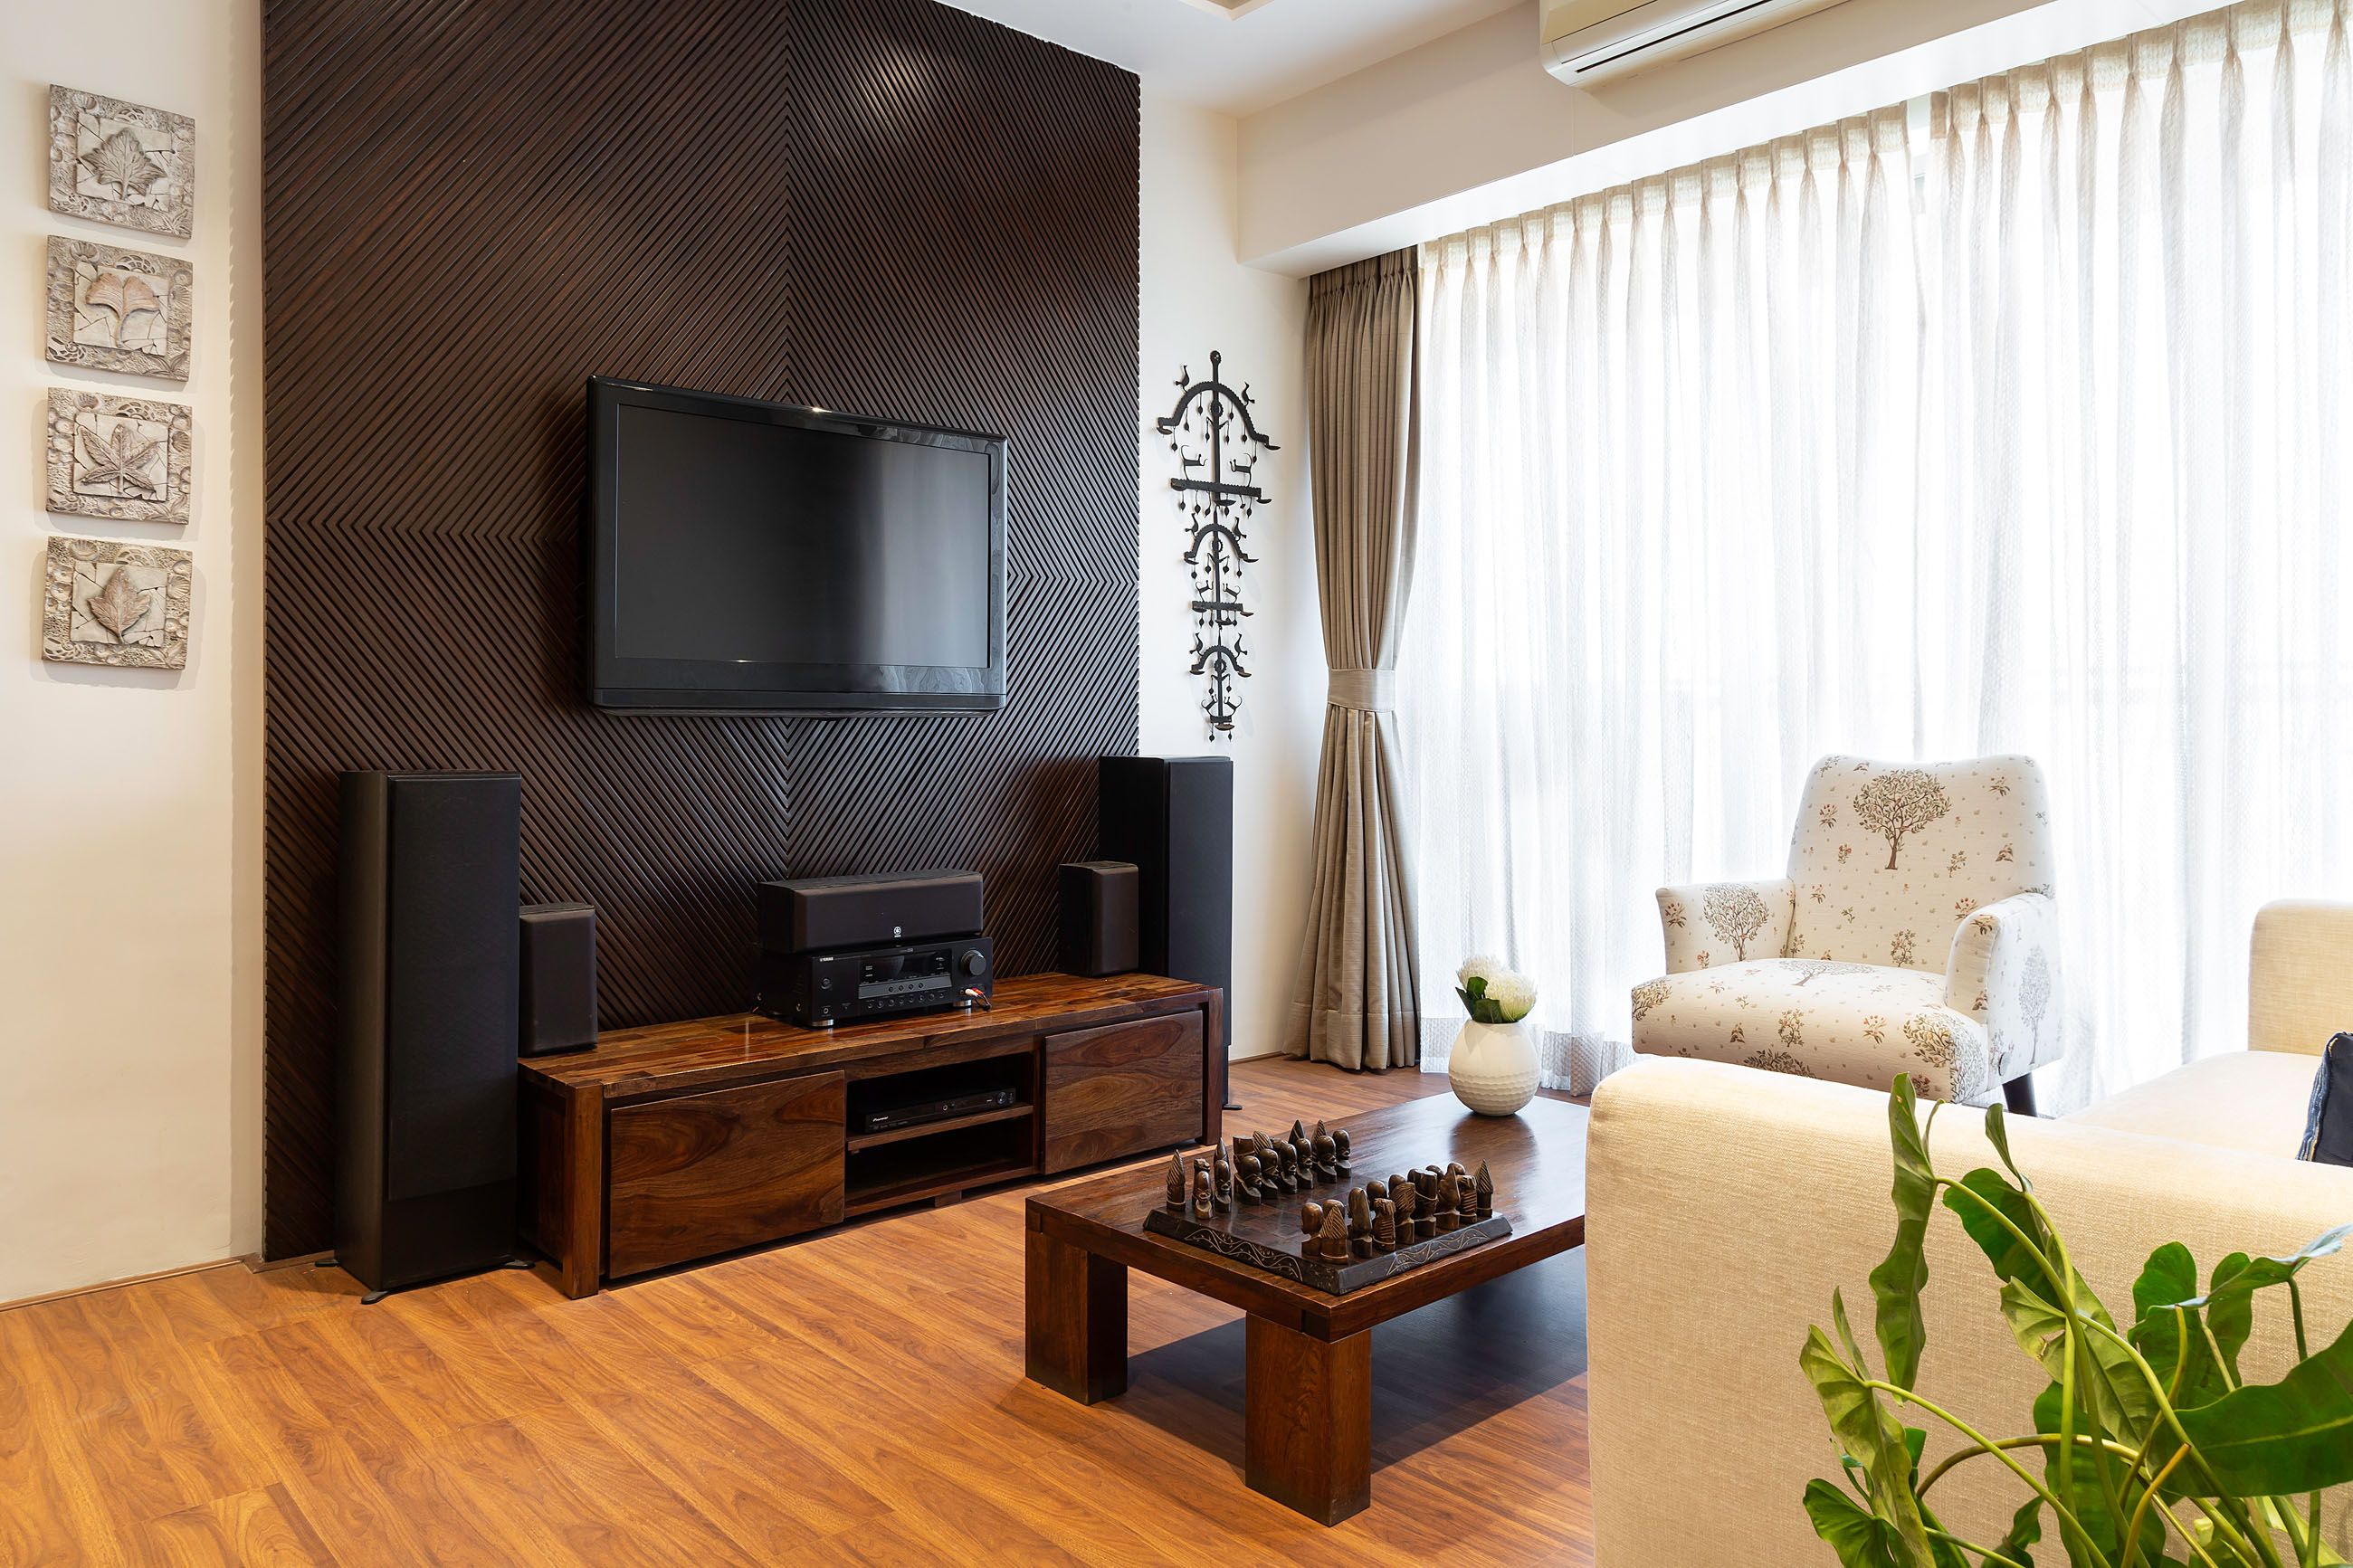 Modern 2-BHK Flat In Mumbai With Wooden Fluted TV Unit Design